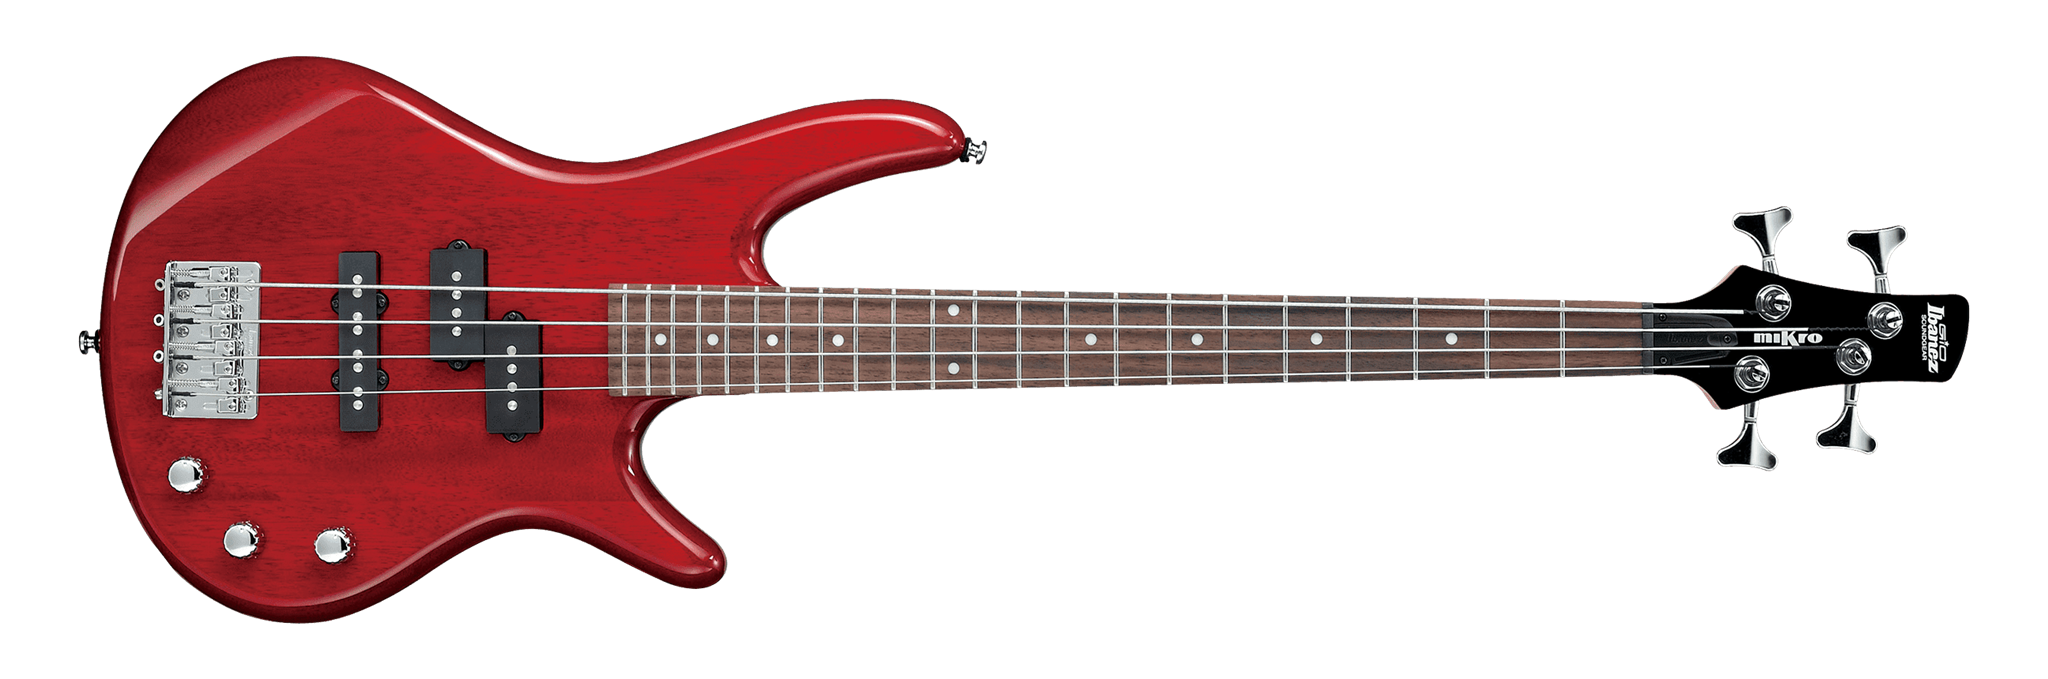 Ibanez MIKRO GSRM20 Transparent Red 28.6 Inch Short Scale 4-String Electric Bass Guitar